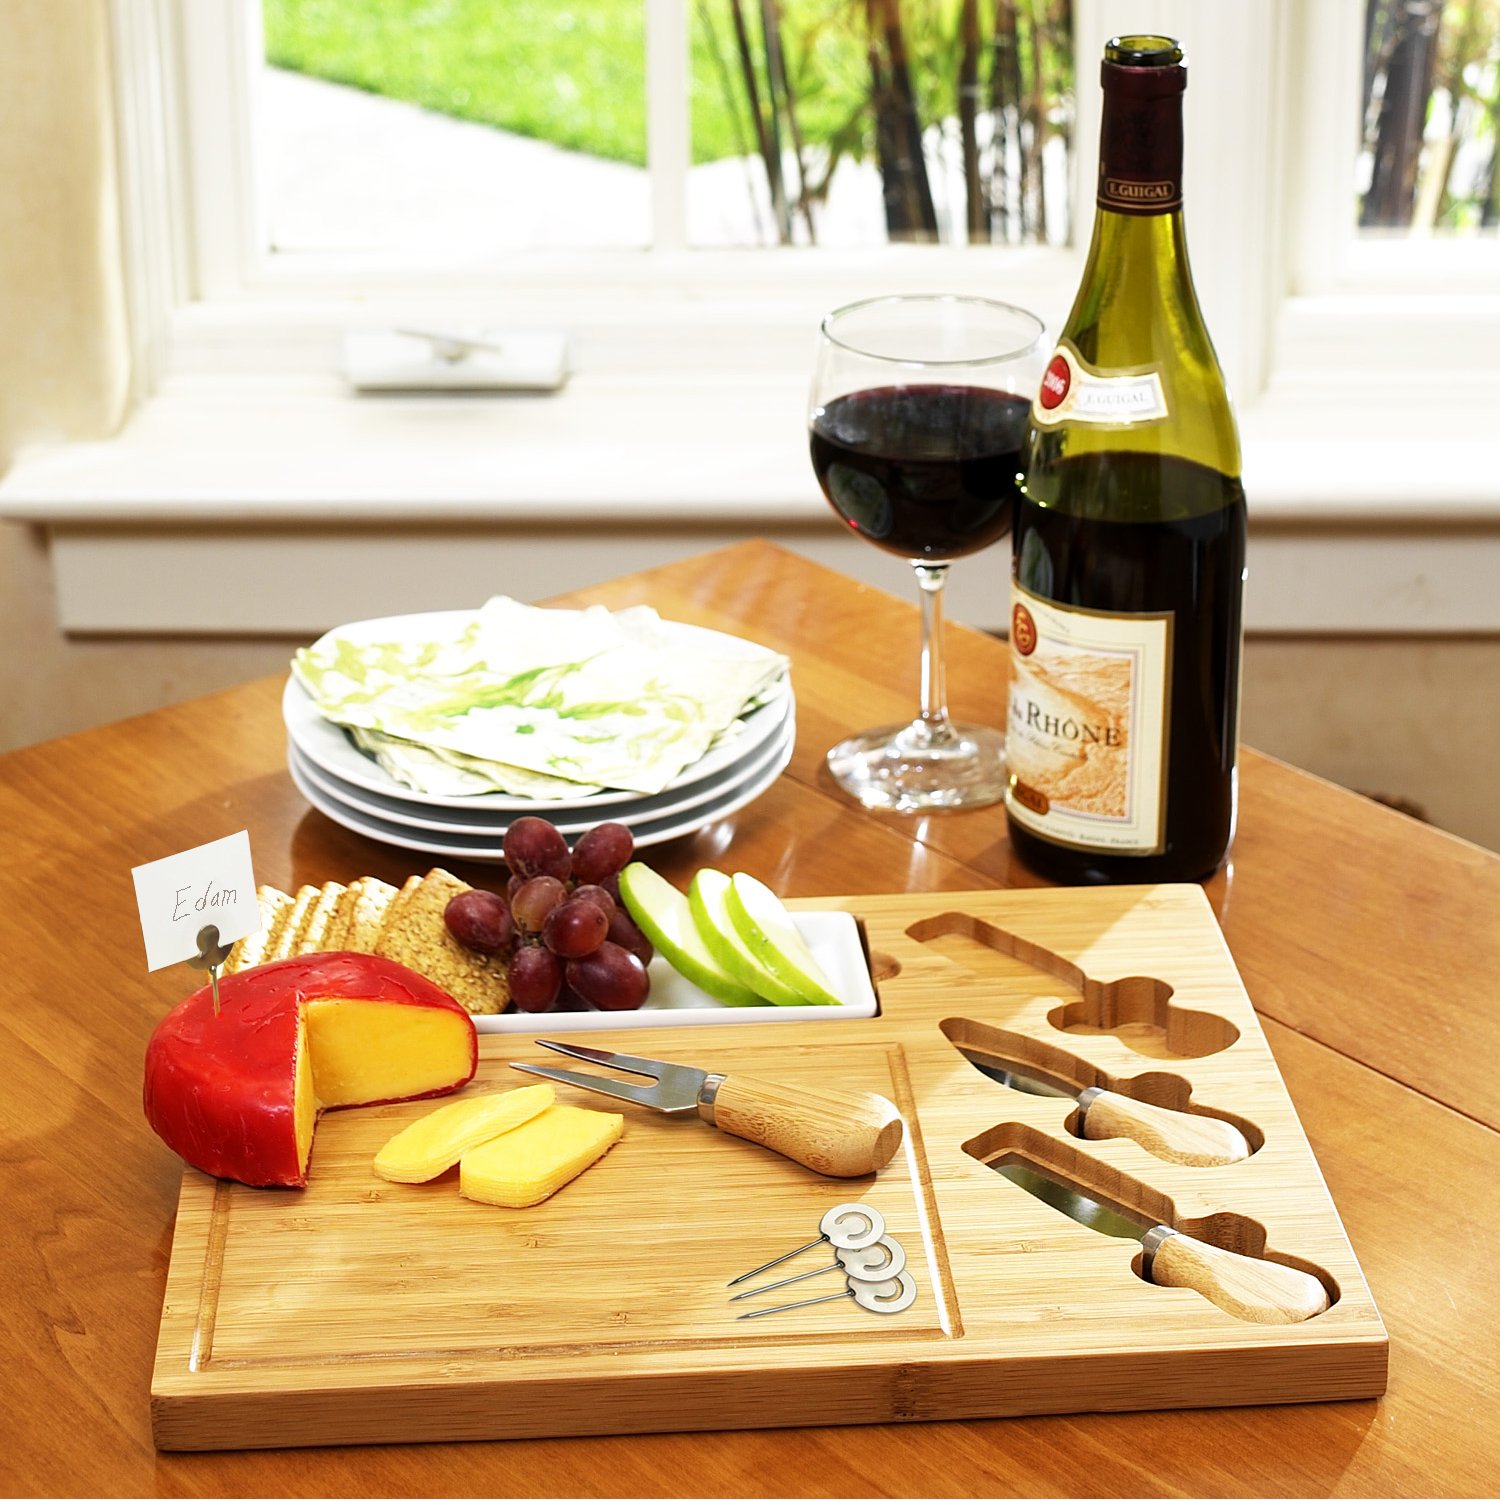 Picnic at Ascot Personalized Monogrammed Engraved Bamboo Cutting Board for Cheese & Charcuterie Platter- includes Knives, Ceramic Dish, & Cheese Markers - Designed and Quality Checked in USA